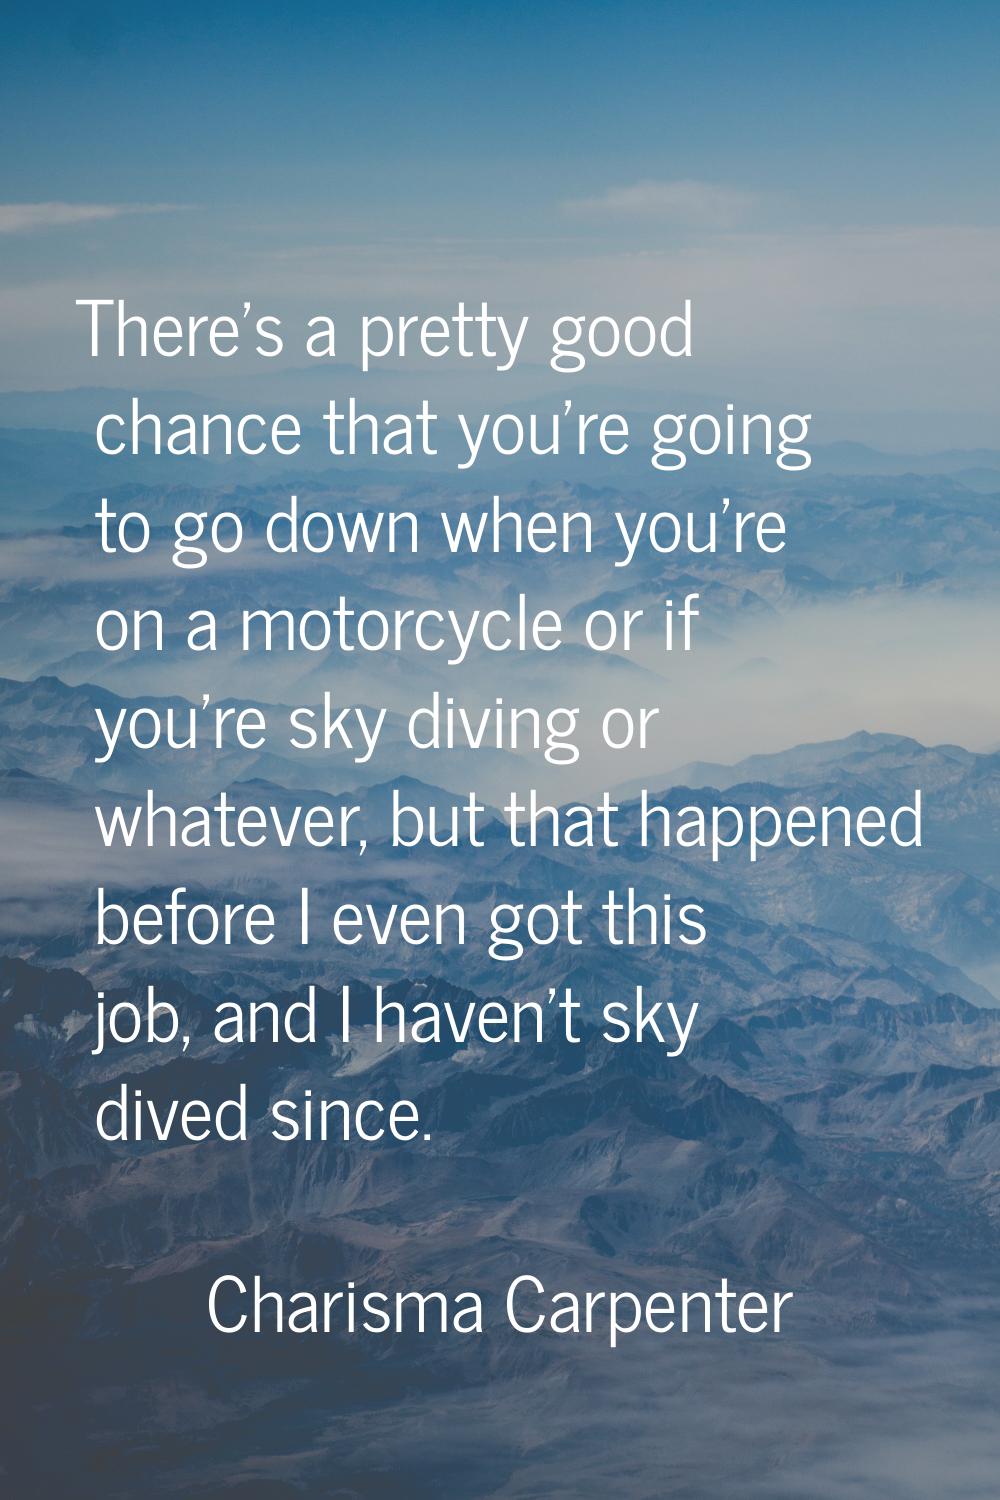 There's a pretty good chance that you're going to go down when you're on a motorcycle or if you're 